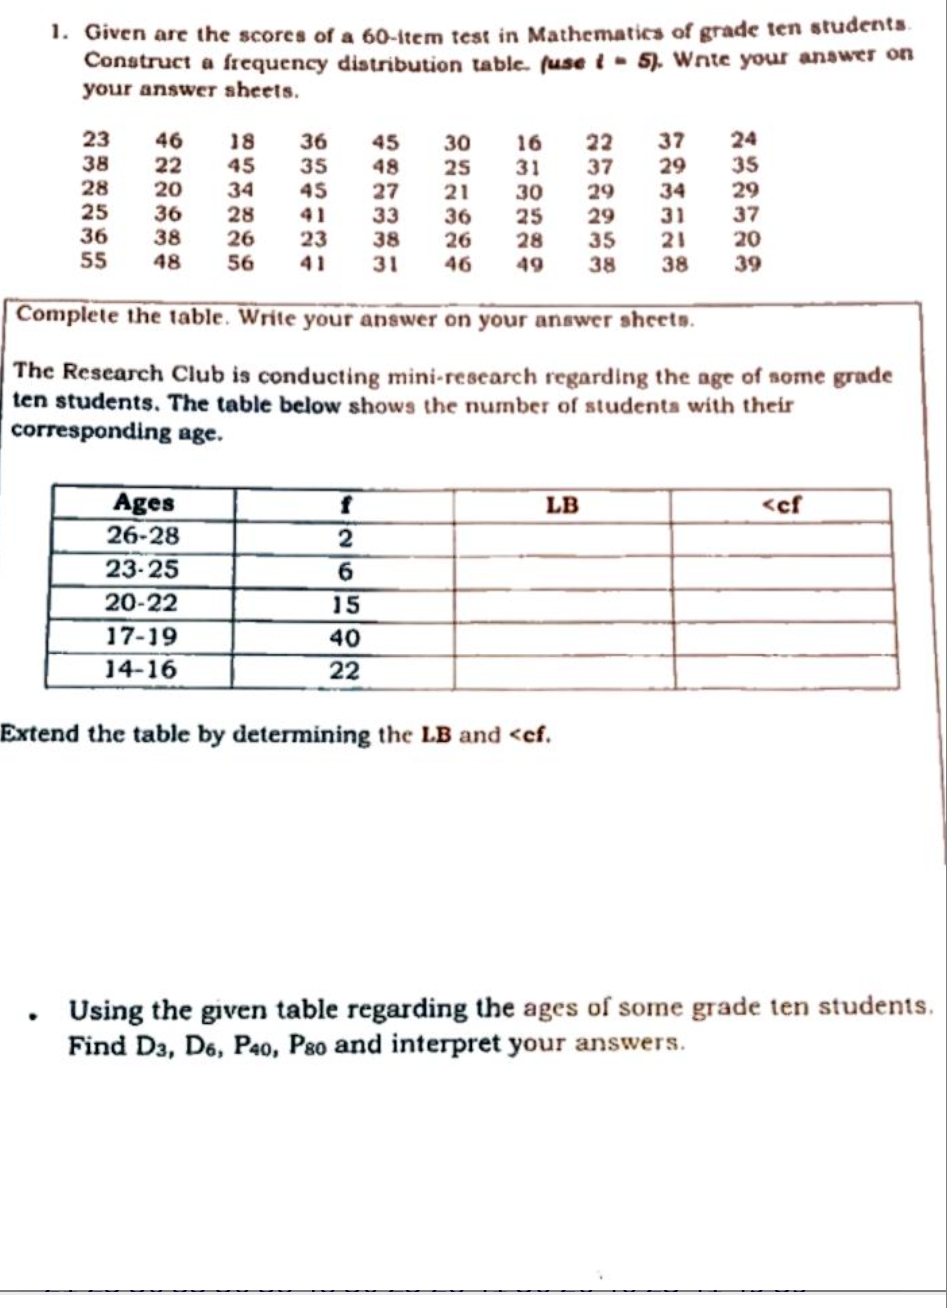 1. Given are the scores of a 60-Item test in Mathematics of grade ten students.
Construct a frequency distribution table. fuse i- 5). Wnte your answer on
your answer sheets.
23
46
22
20
36
38
24
35
29
37
20
39
18
45
22
37
37
29
36
45
30
16
38
28
25
35
48
27
33
25
31
34
28
26
56
45
34
31
21
36
26
46
30
25
28
49
29
29
35
38
41
36
23
38
21
55
48
41
31
38
Complete the table. Write your answer on your answer sheets.
The Research Club is conducting mini-research regarding the age of some grade
ten students. The table below shows the number of studenta with their
corresponding age.
Ages
LB
<cf
26-28
23-25
20-22
15
17-19
40
14-16
22
Extend the table by determining the LB and <ef.
Using the given table regarding the ages of some grade ten students.
Find Da, De, Pao, Pso and interpret your answers.
